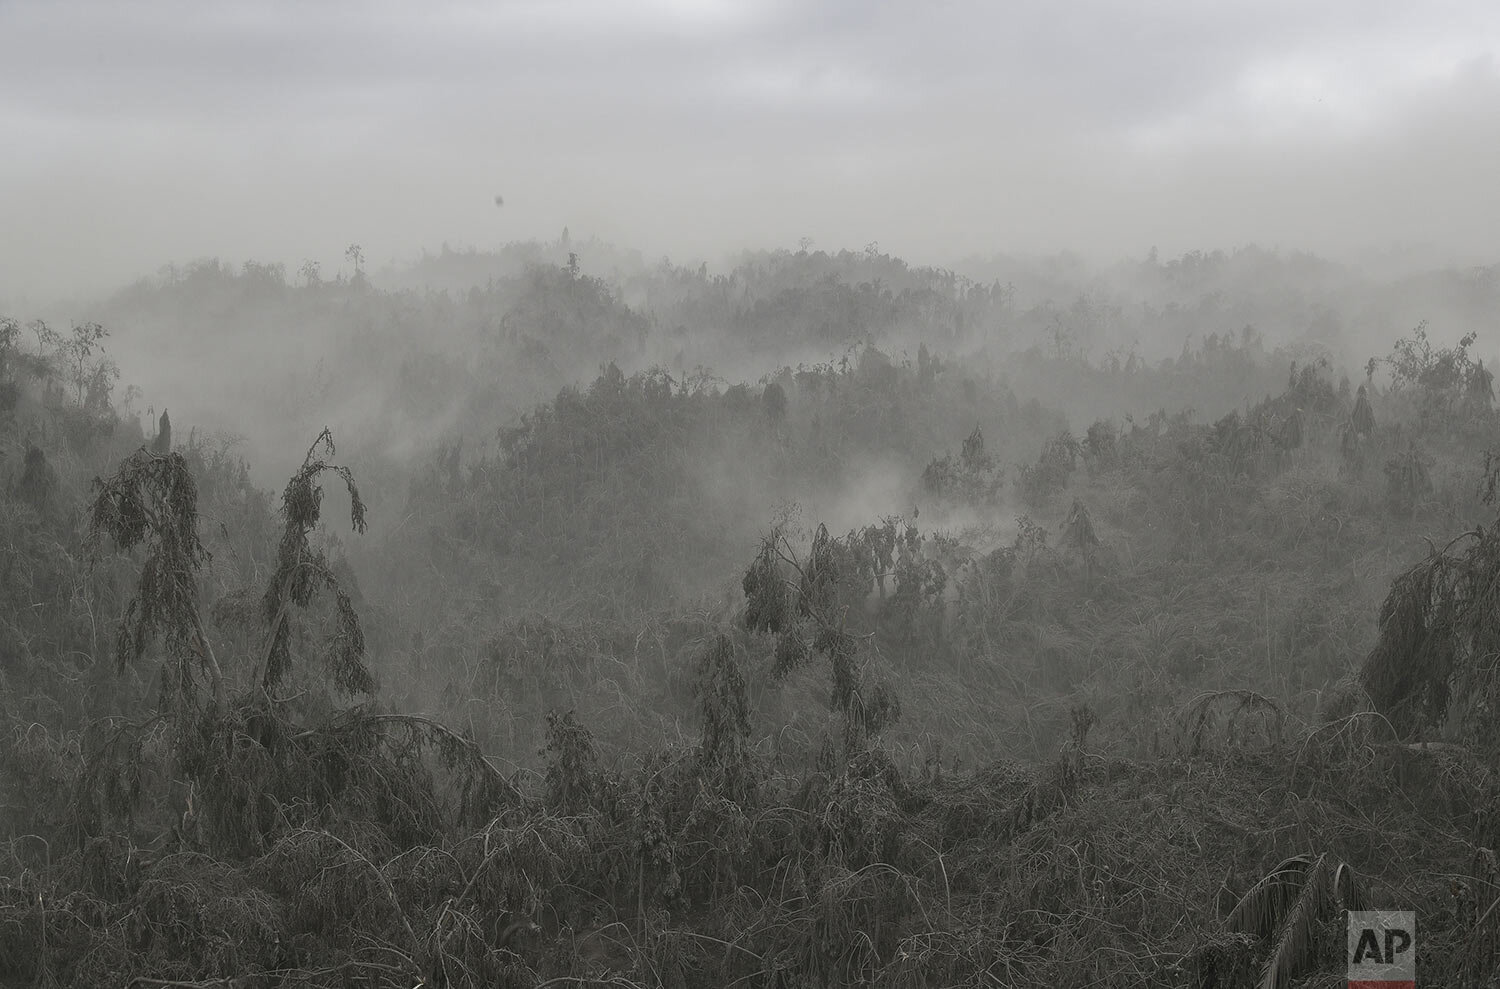  Clouds of volcanic ash rise up from damaged trees in Laurel, Batangas province, southern Philippines on Tuesday, Jan. 14, 2020. (AP Photo/Aaron Favila) 